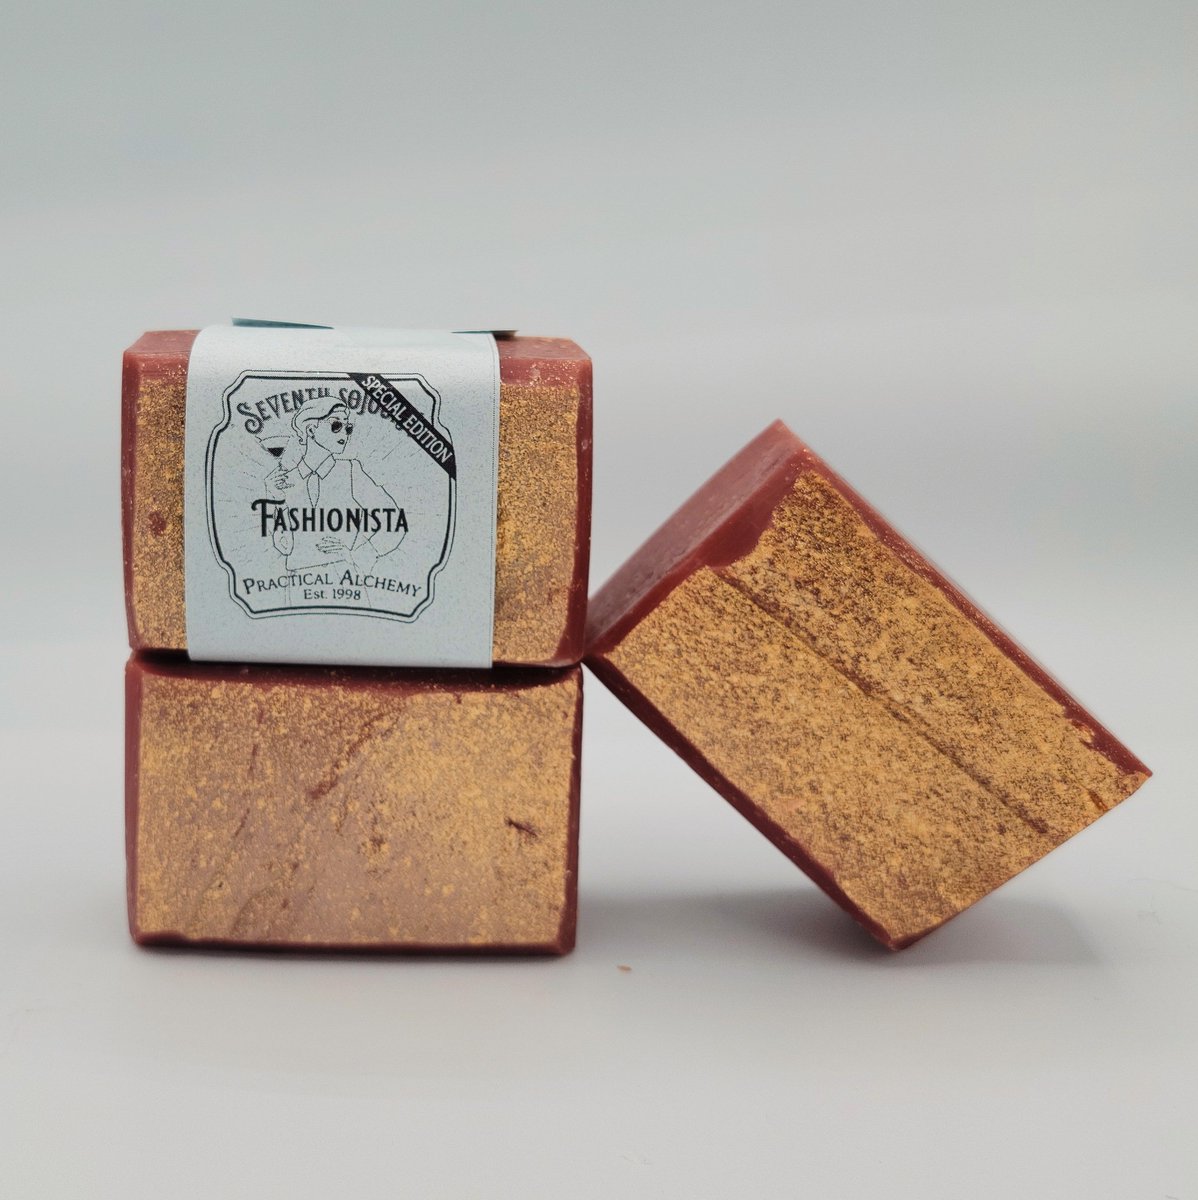 We have a new #soap...Fashionista. A blend of citrus, florals & spice, this fragrance is the essence of style. Under a veil of white musk, pink rose blends with sweet citrus and cinnamon stick. Get 20% off for orders of $36+ use code BEMYVALENTINE buff.ly/3gxzKdV